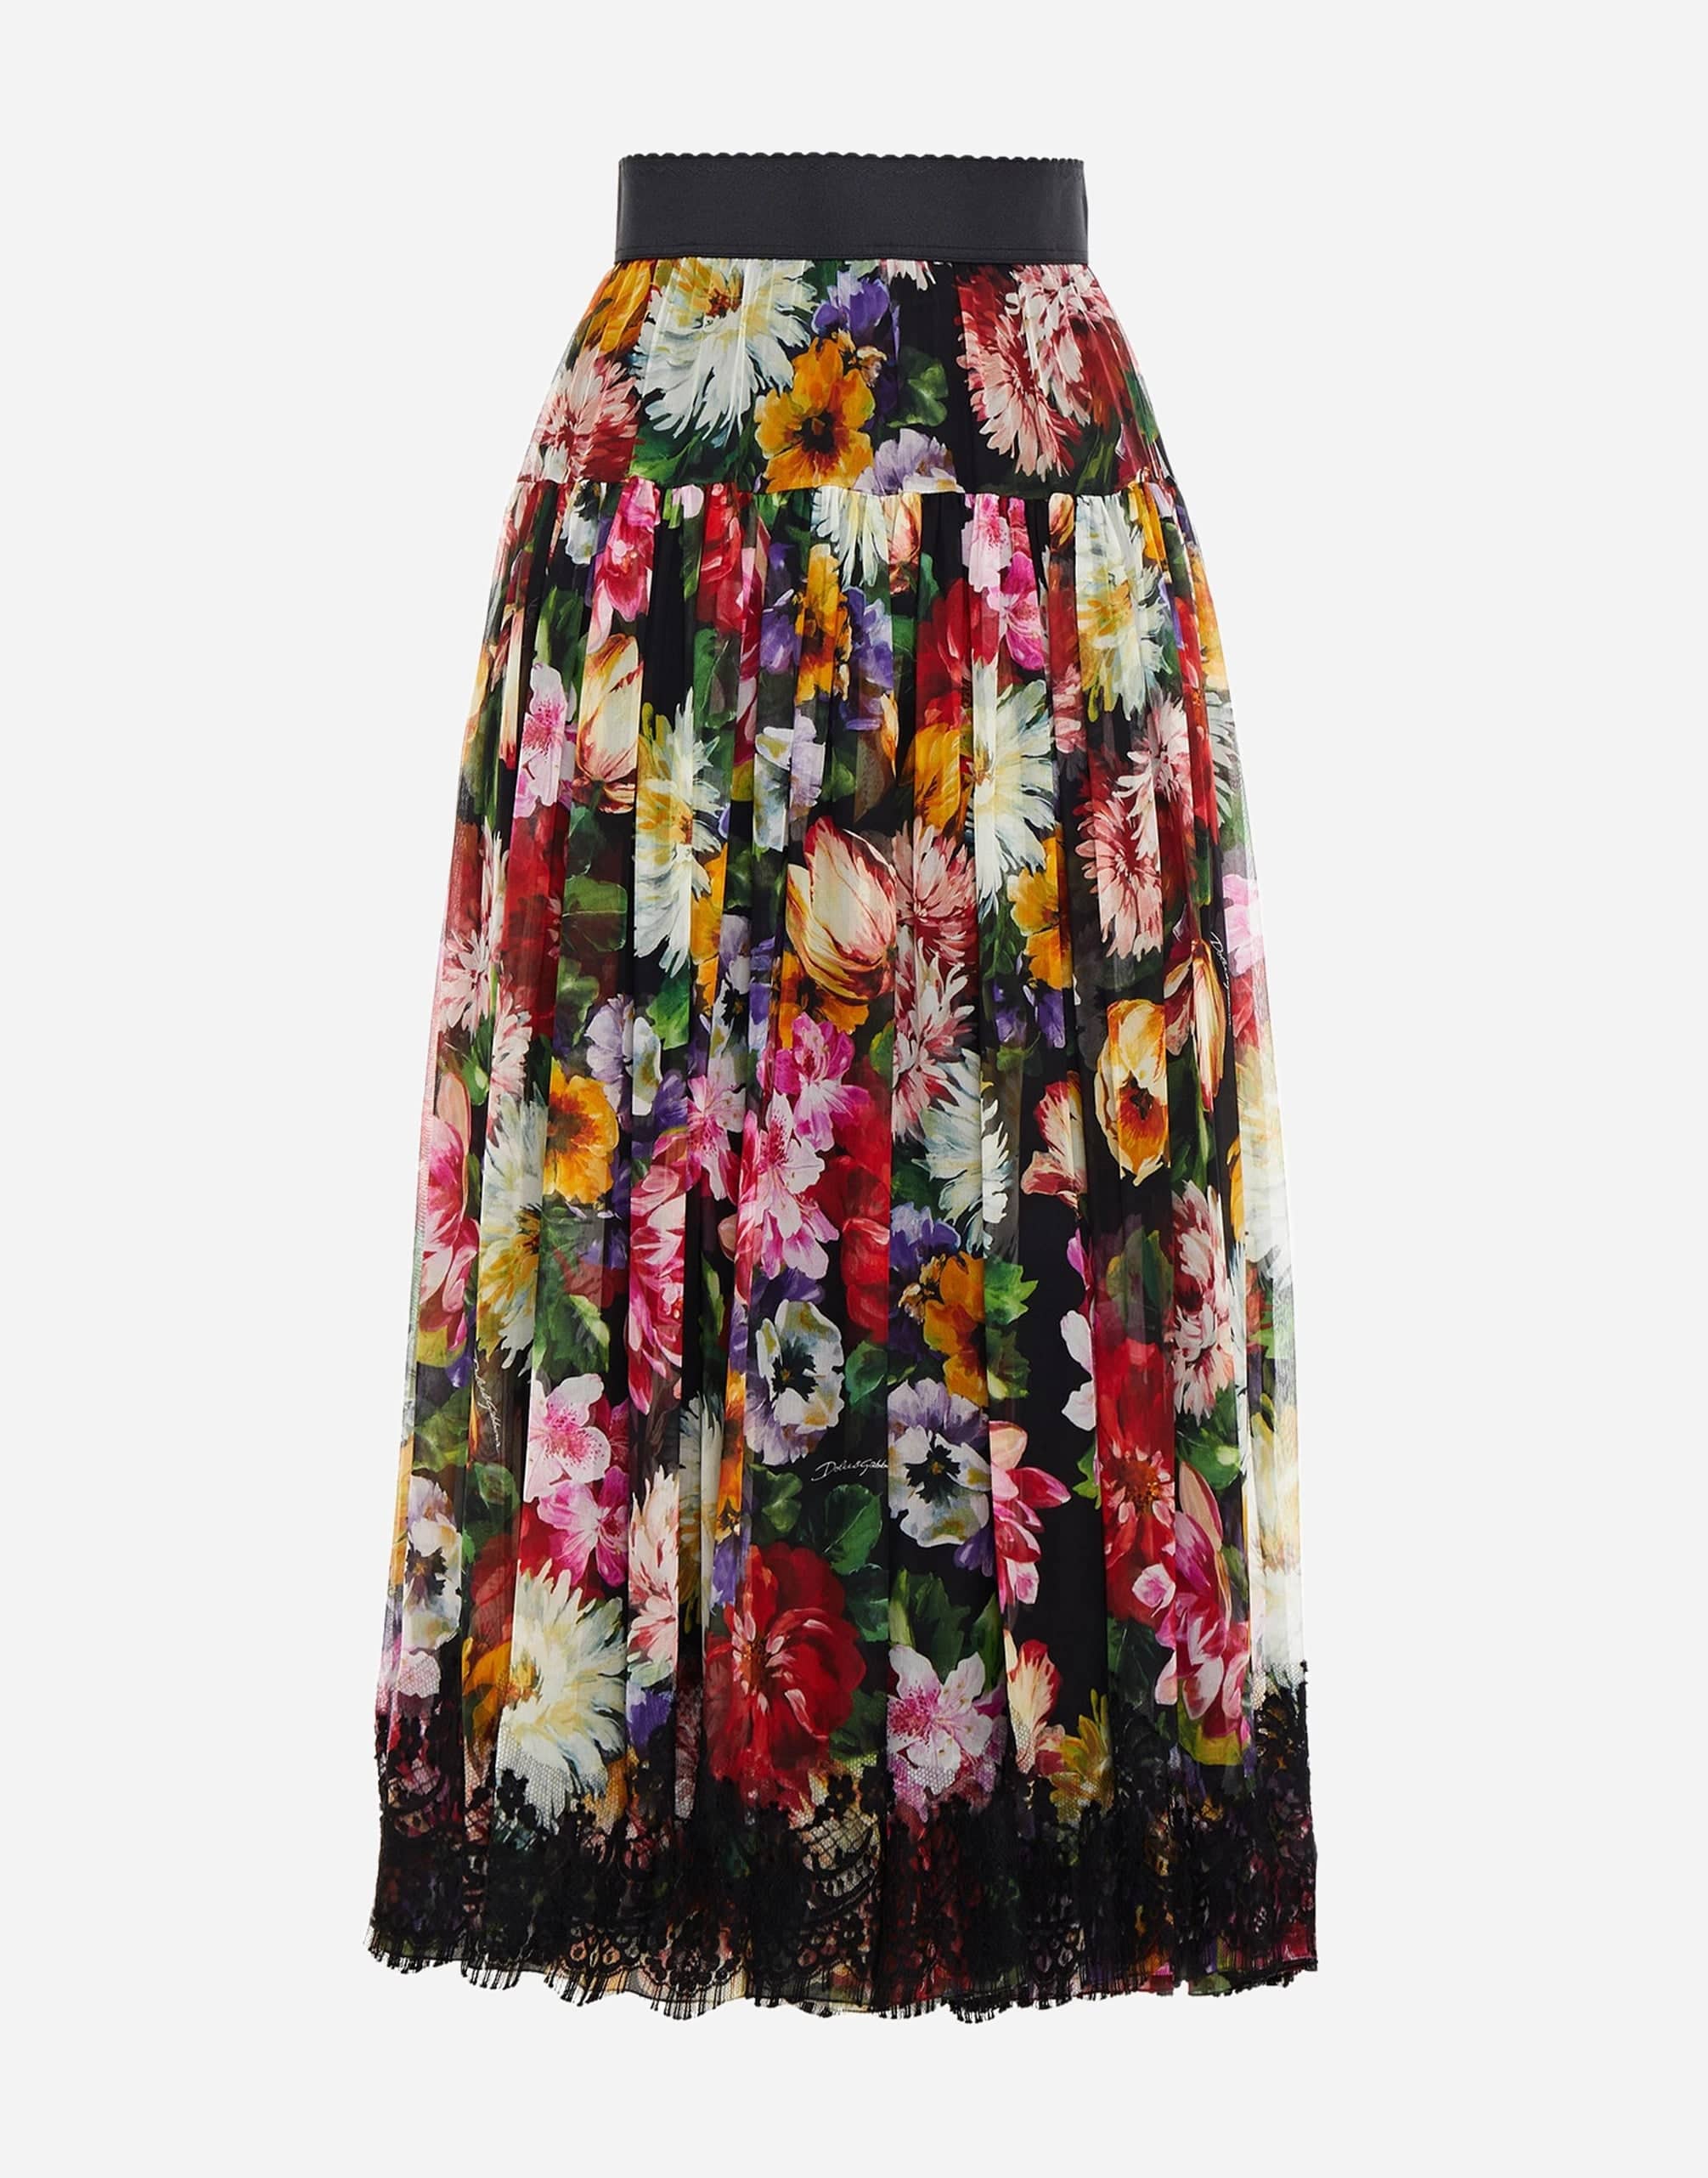 Lace-Trimmed Floral-Print Midi Skirt